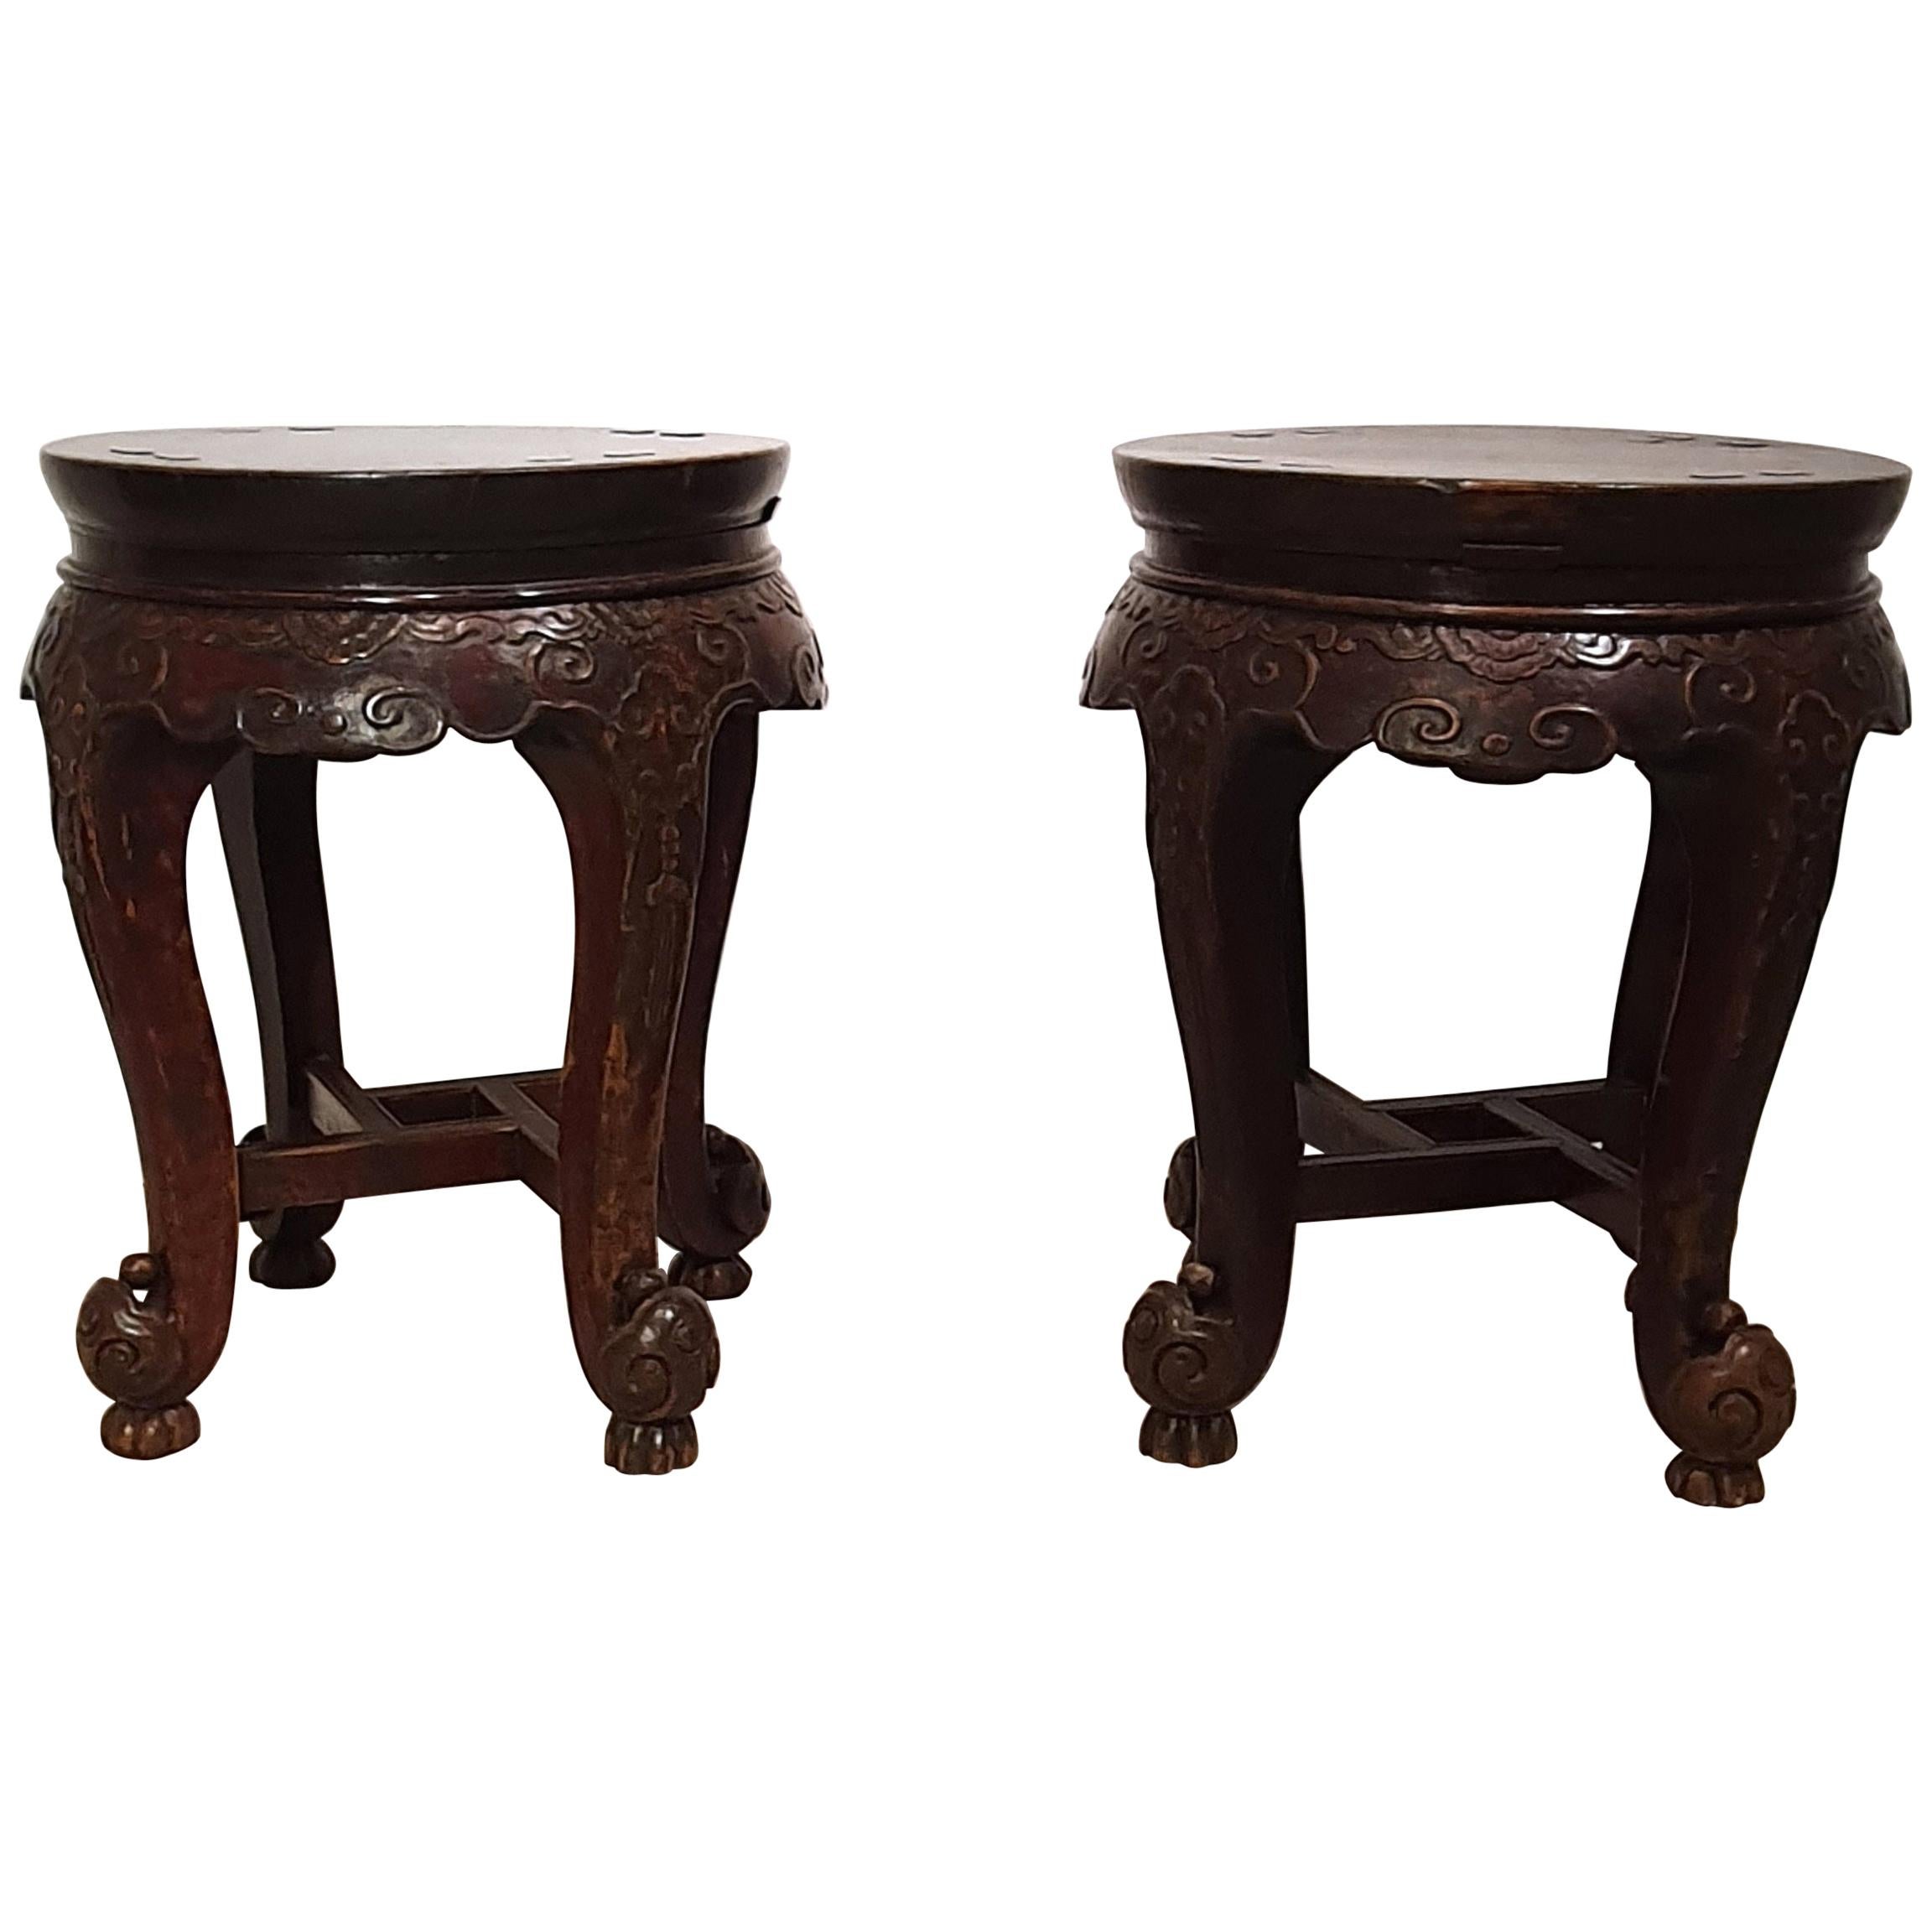 Pair of 19th Century Hardwood Chinese Stands